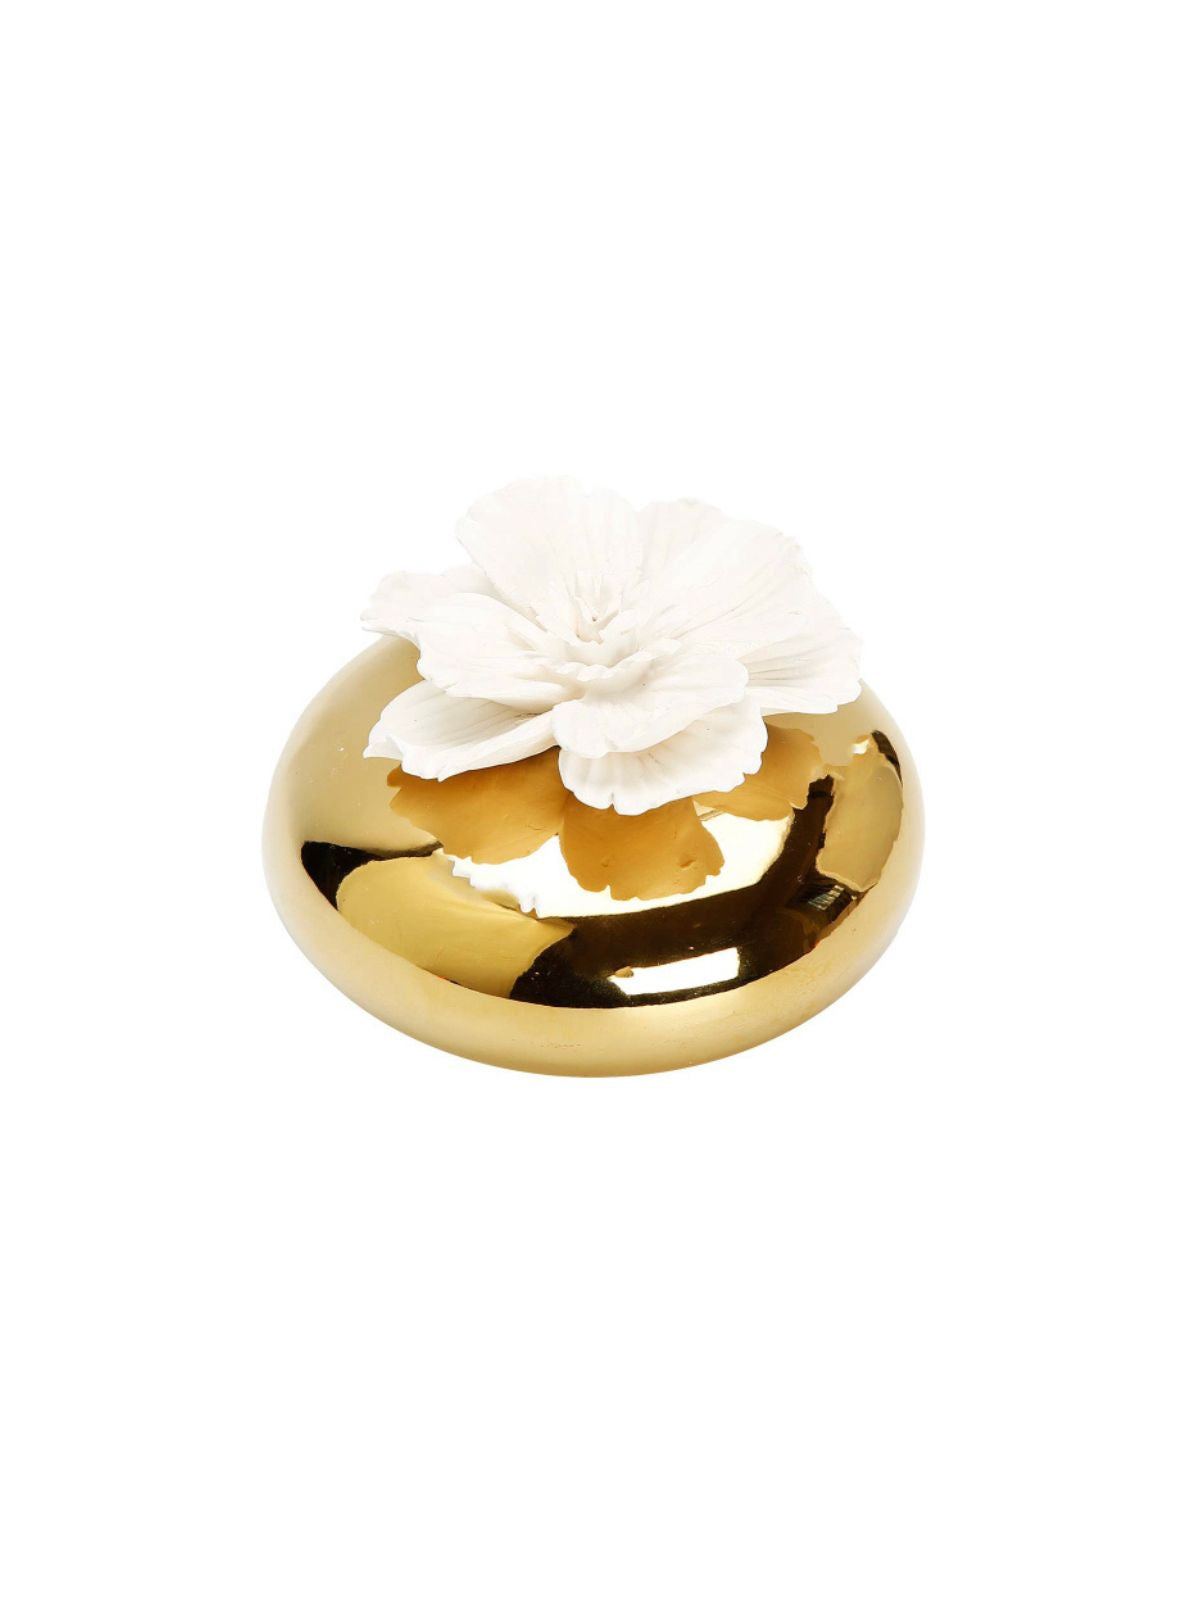 Champagne gold porcelain oil diffuser with 3 white dimensional floral topper that diffuses Lily of the Valley Scent.